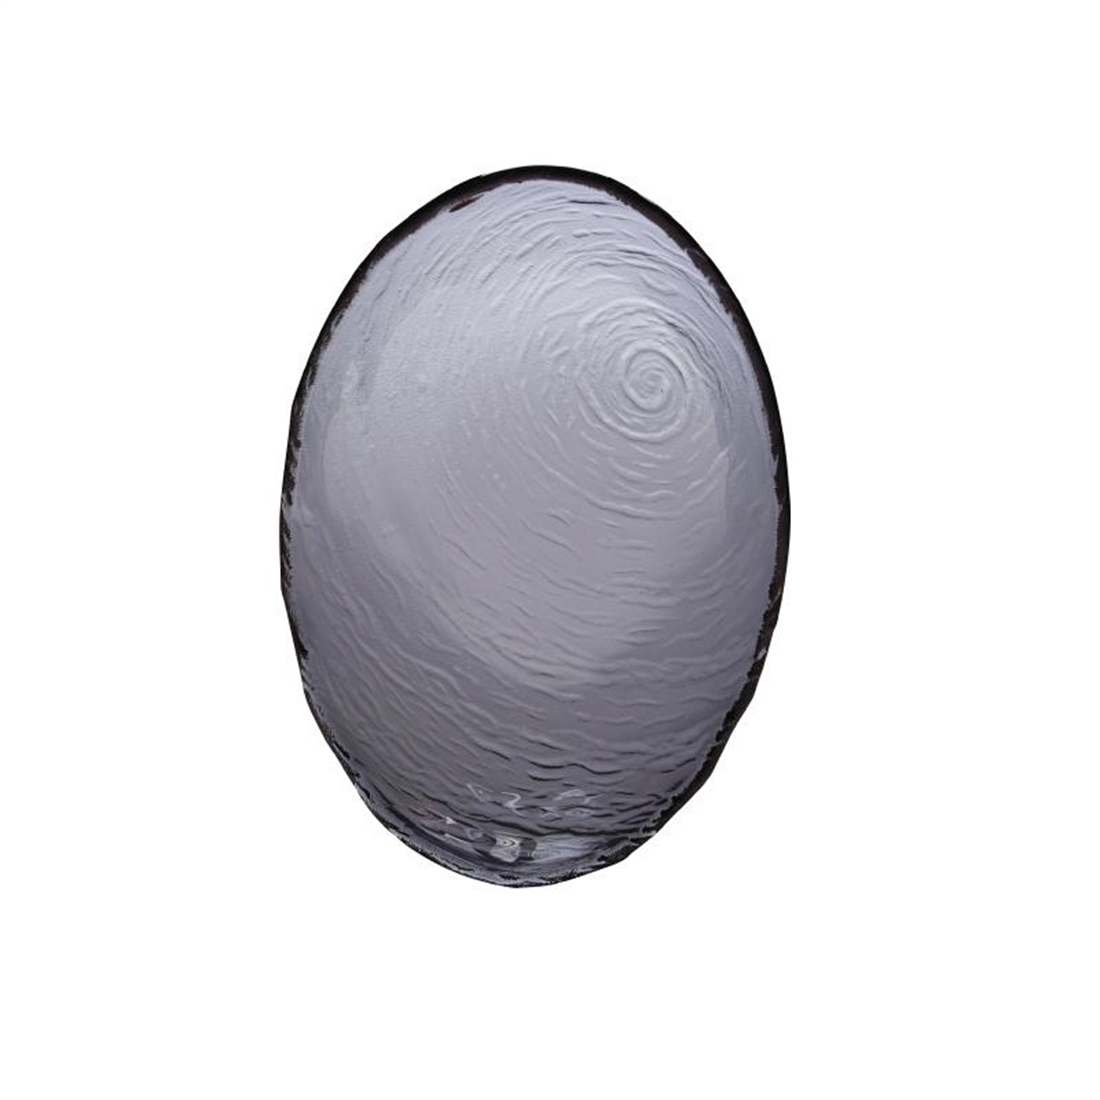 Steelite Scape Glass Smoked Oval Bowls 300mm